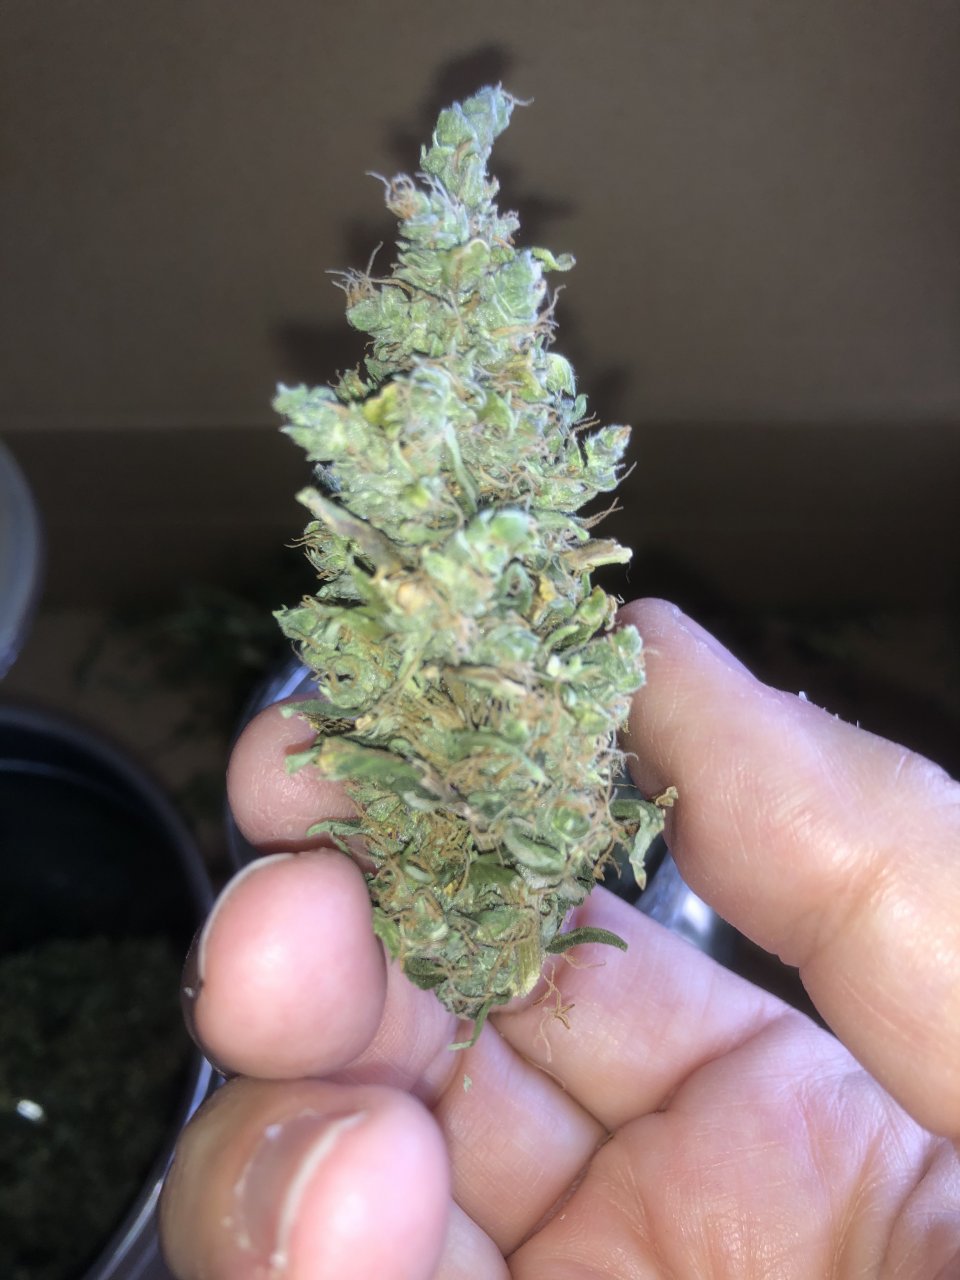 My first grow - one of the buds